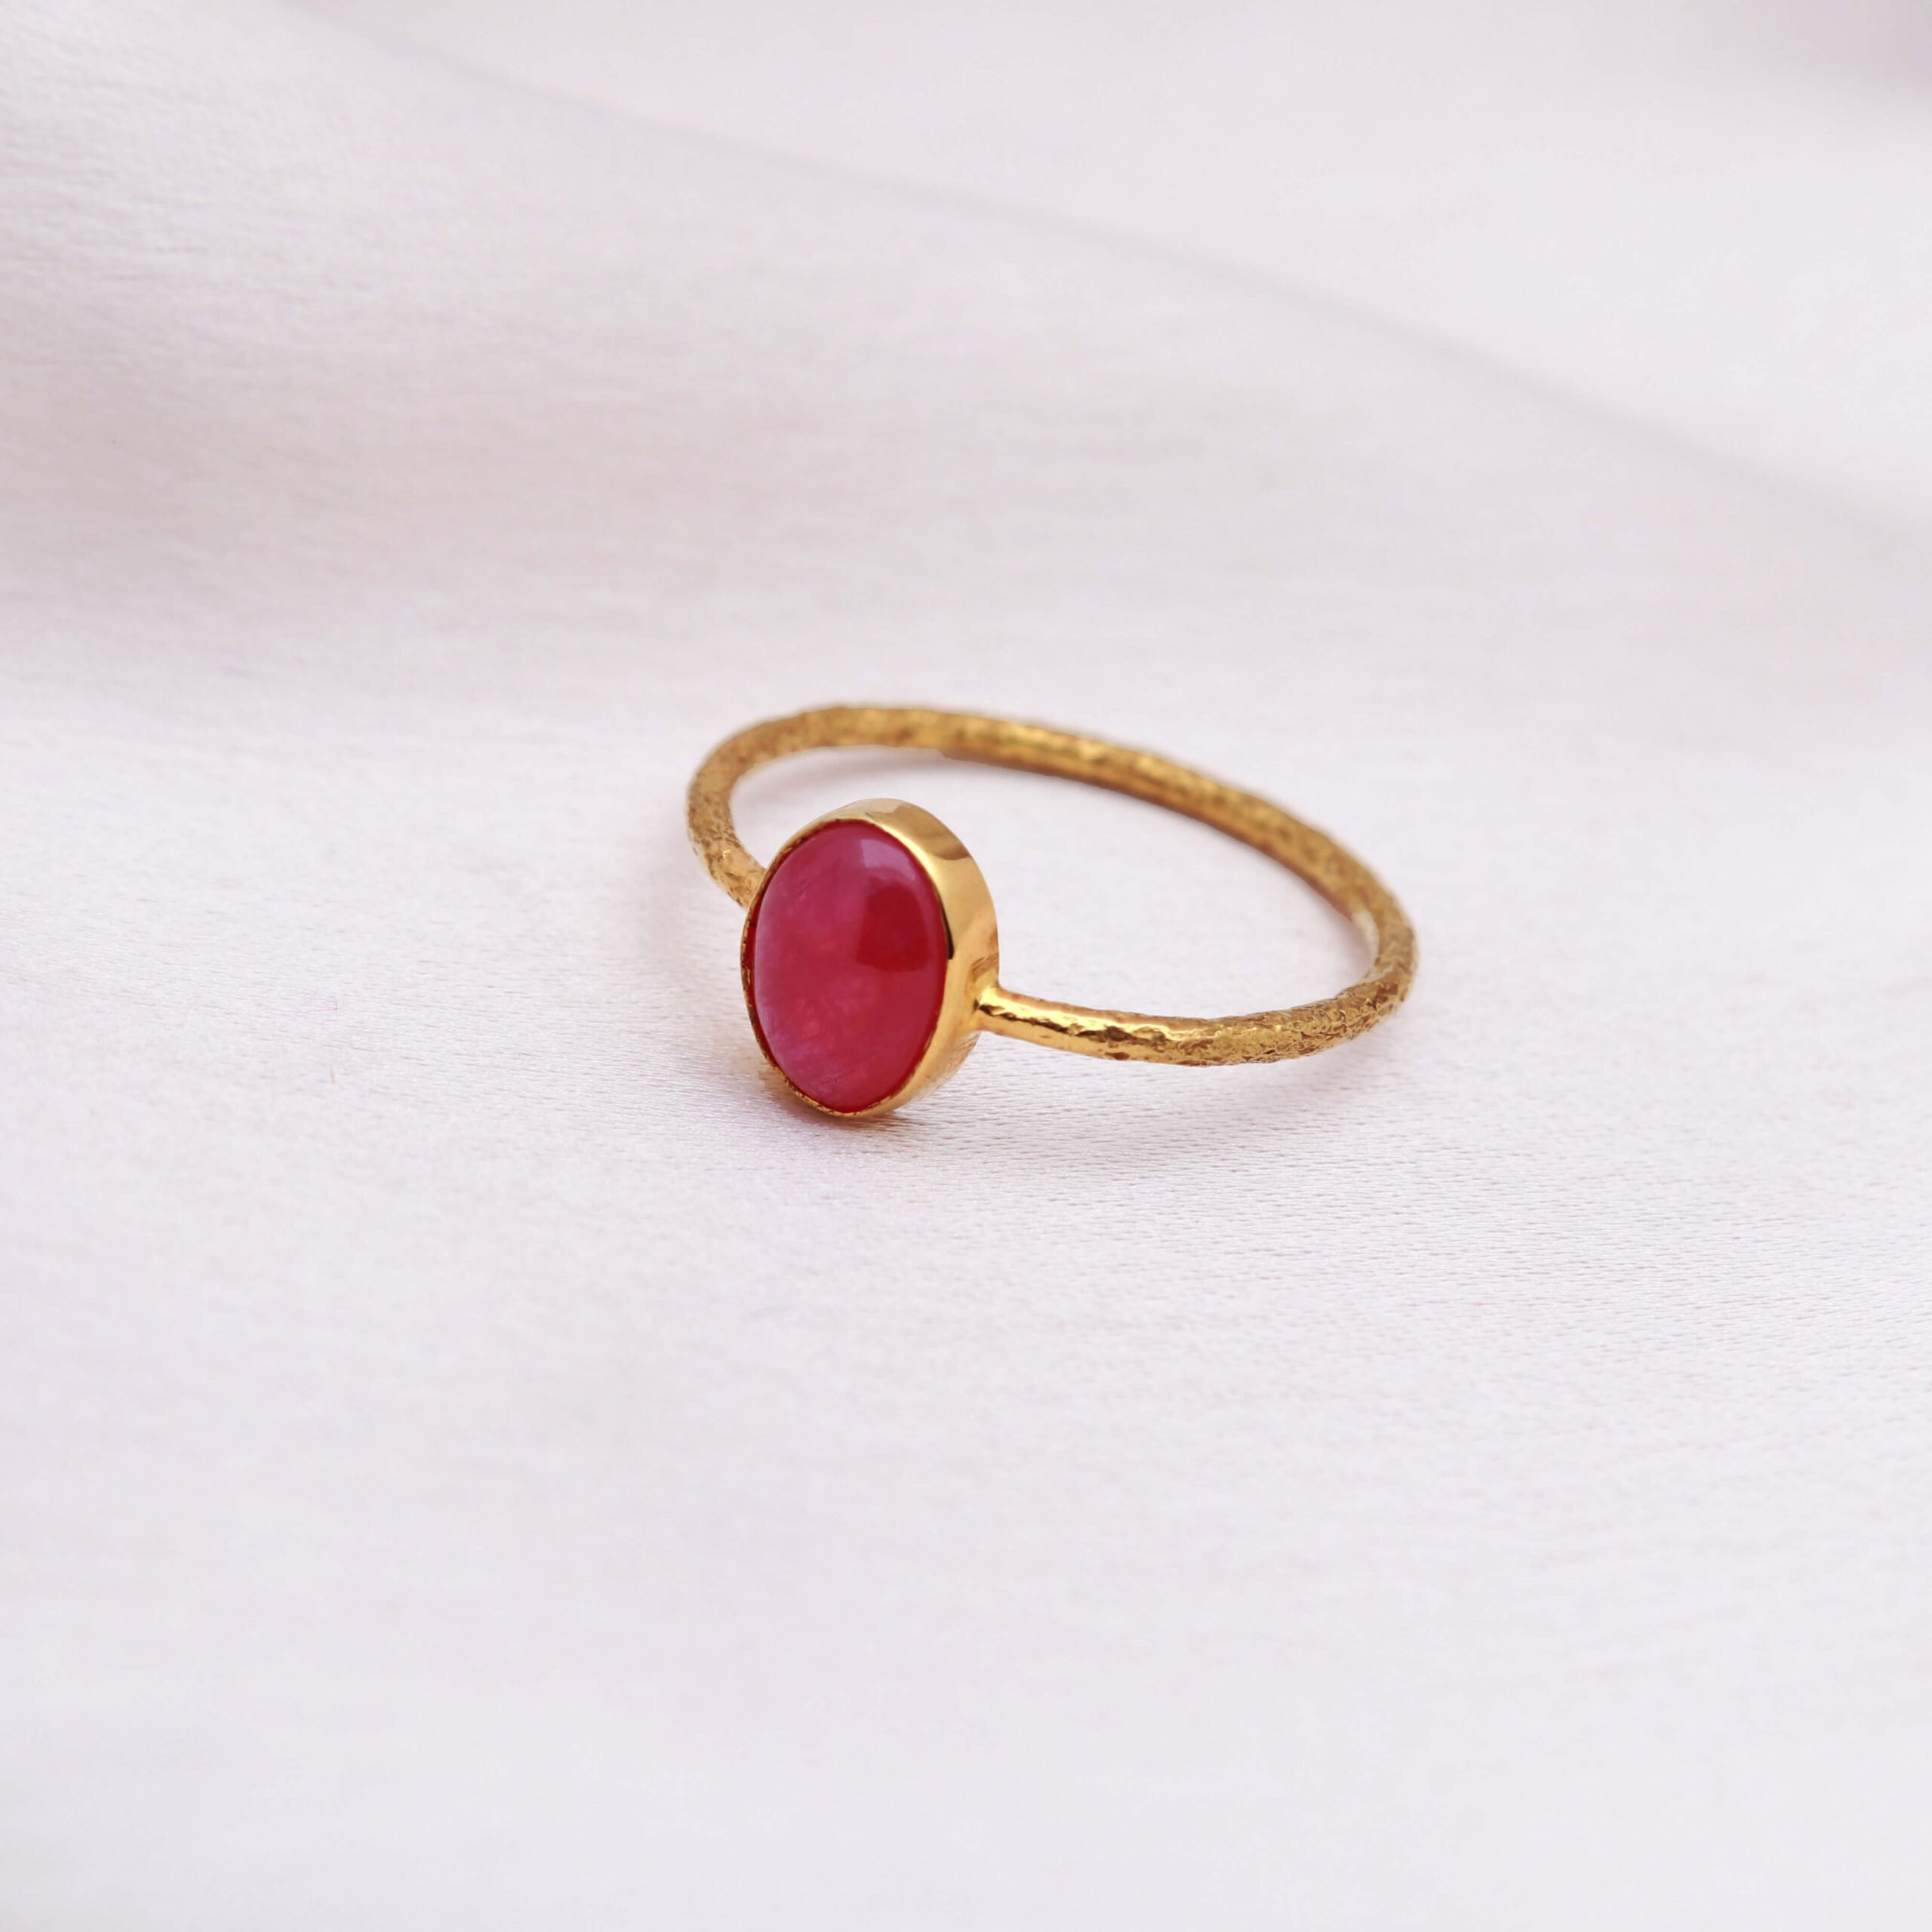 Radiant oval shaped star ruby sterling silver ring